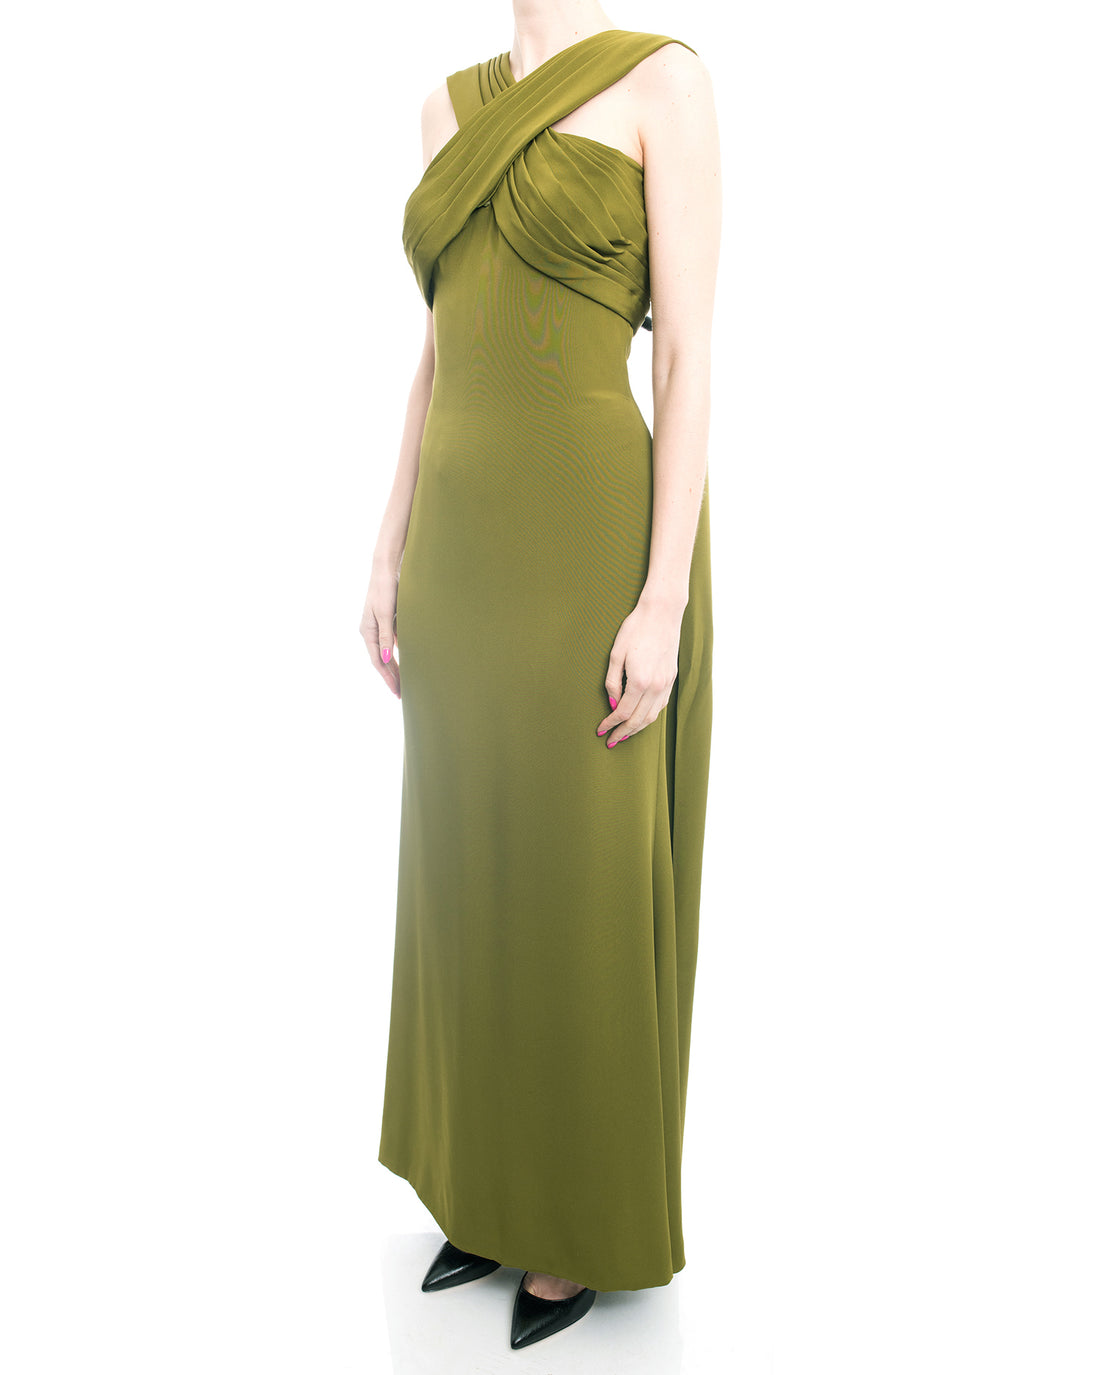 Yves Saint Laurent Haute Couture Vintage 1990’s Olive Green Gown